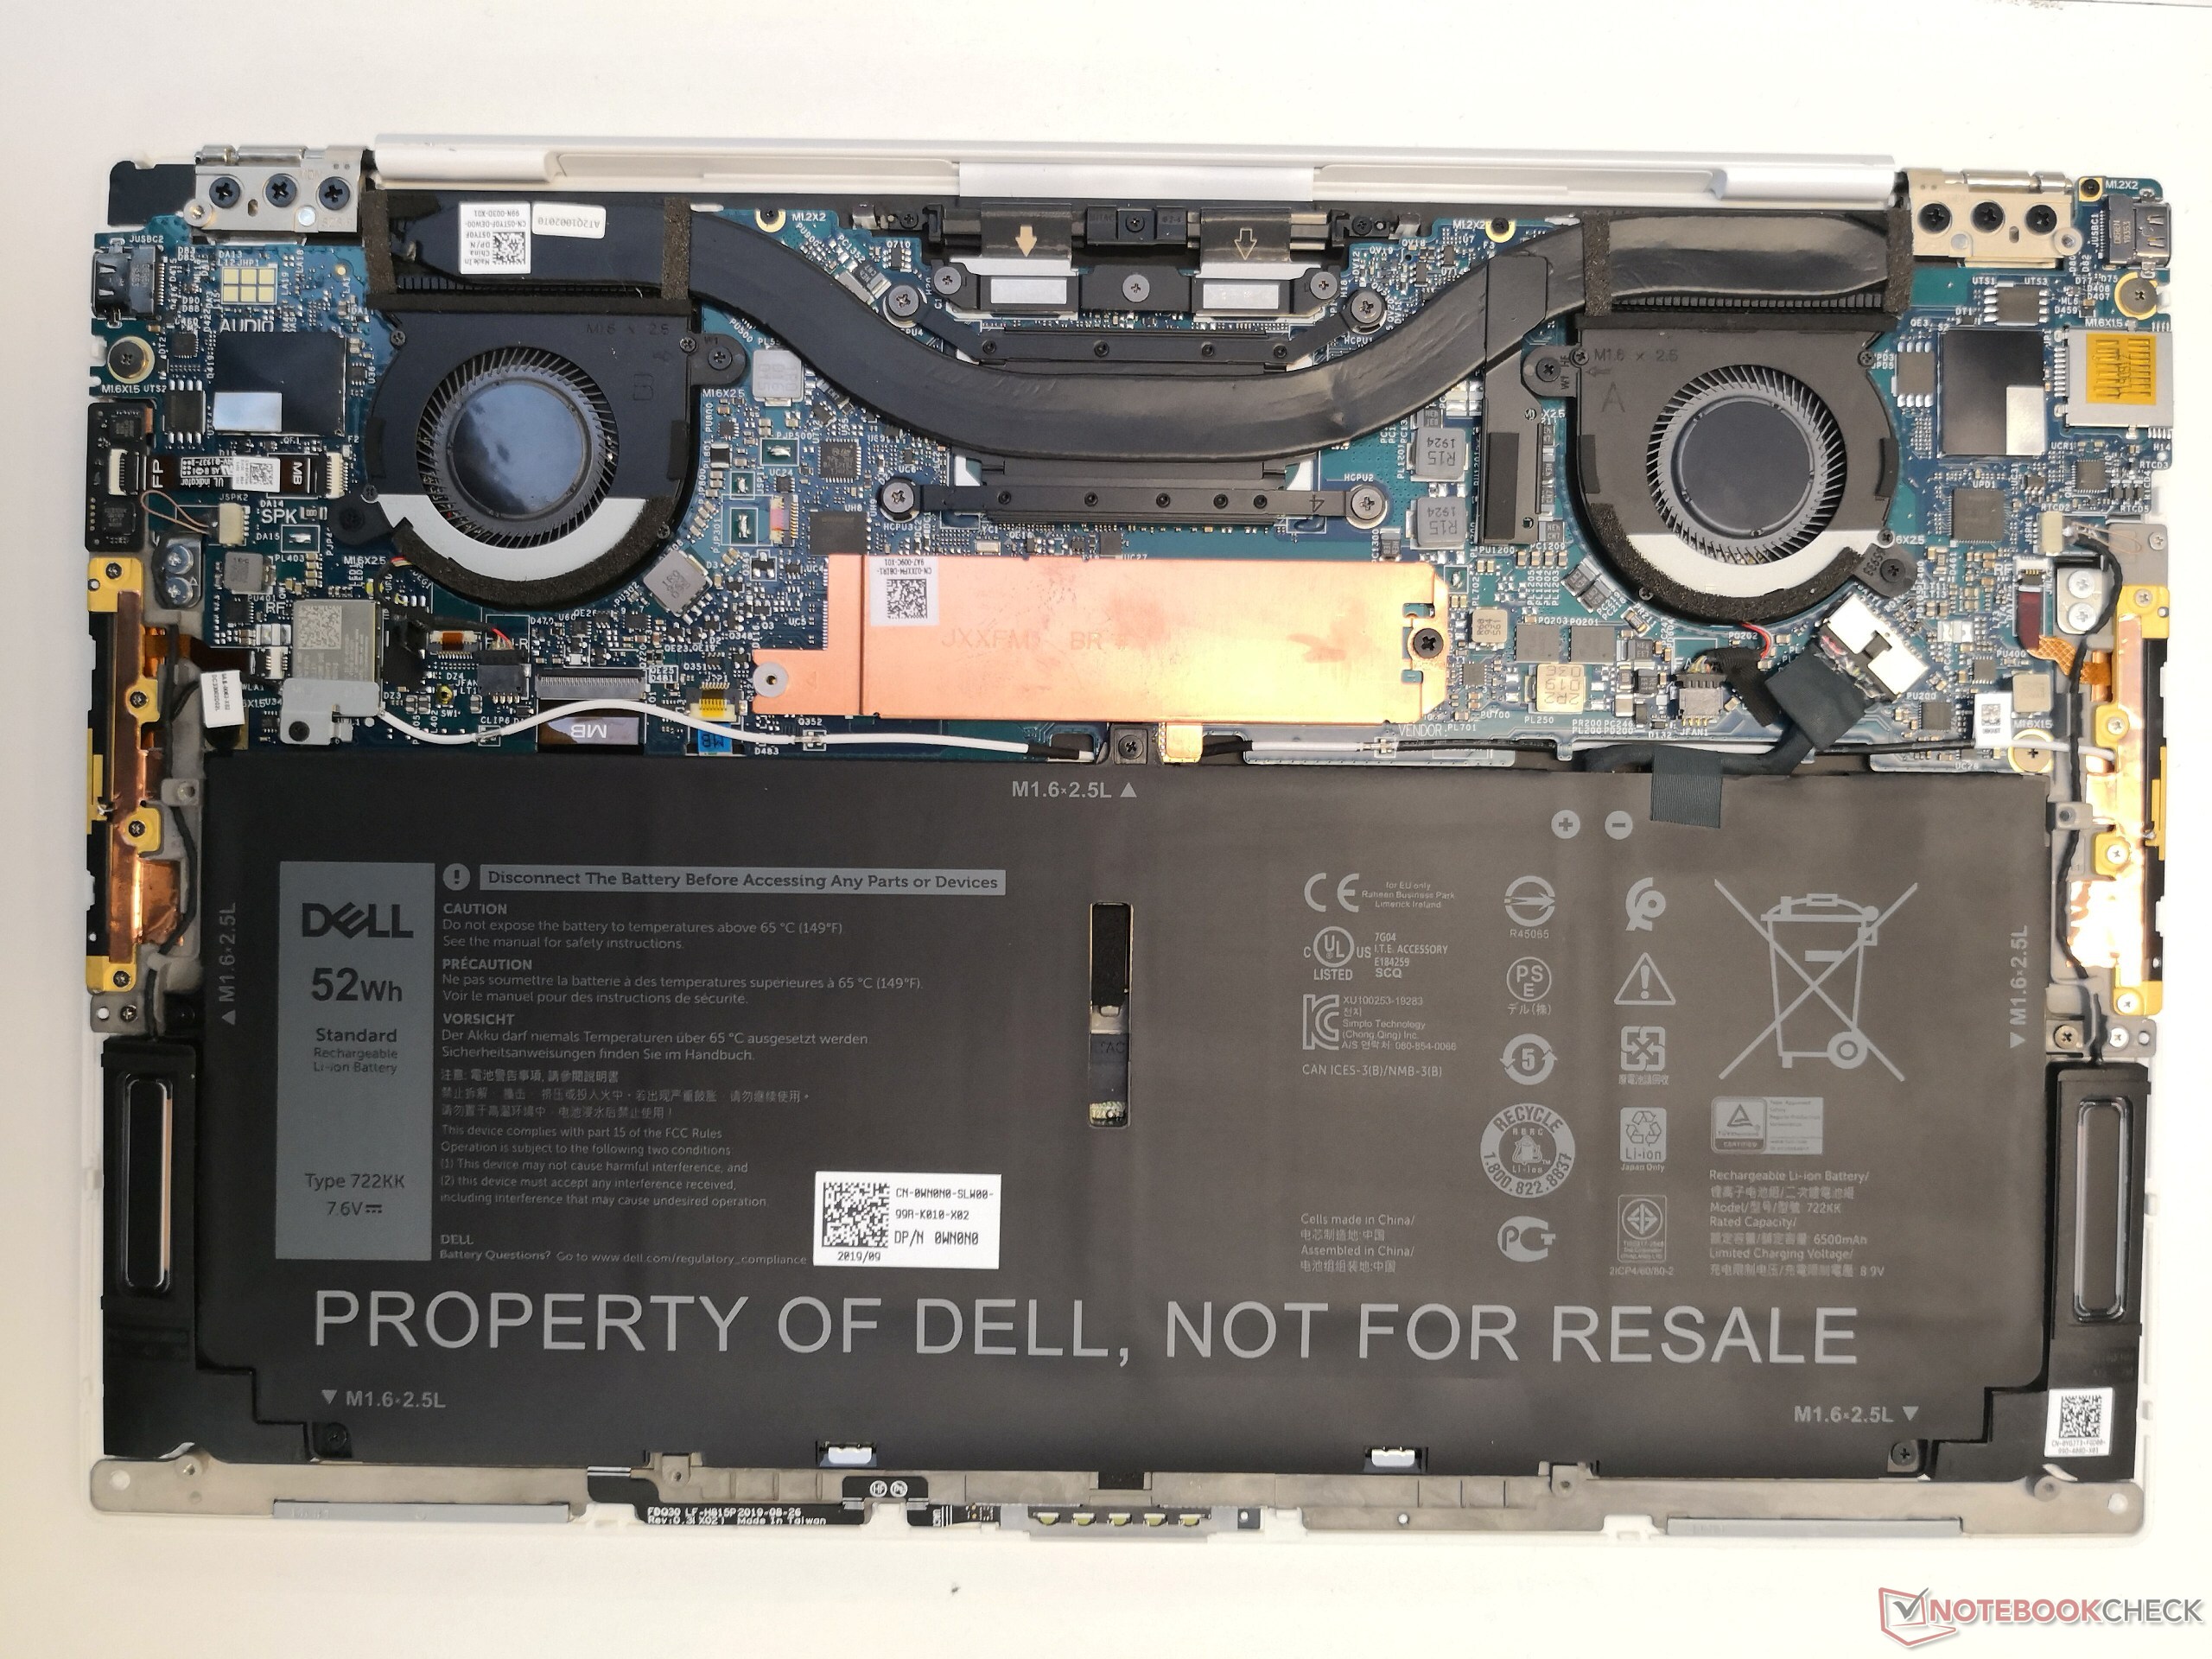 Dell XPS 13 9300 in pictures: Don't worry, the SSD is now ...